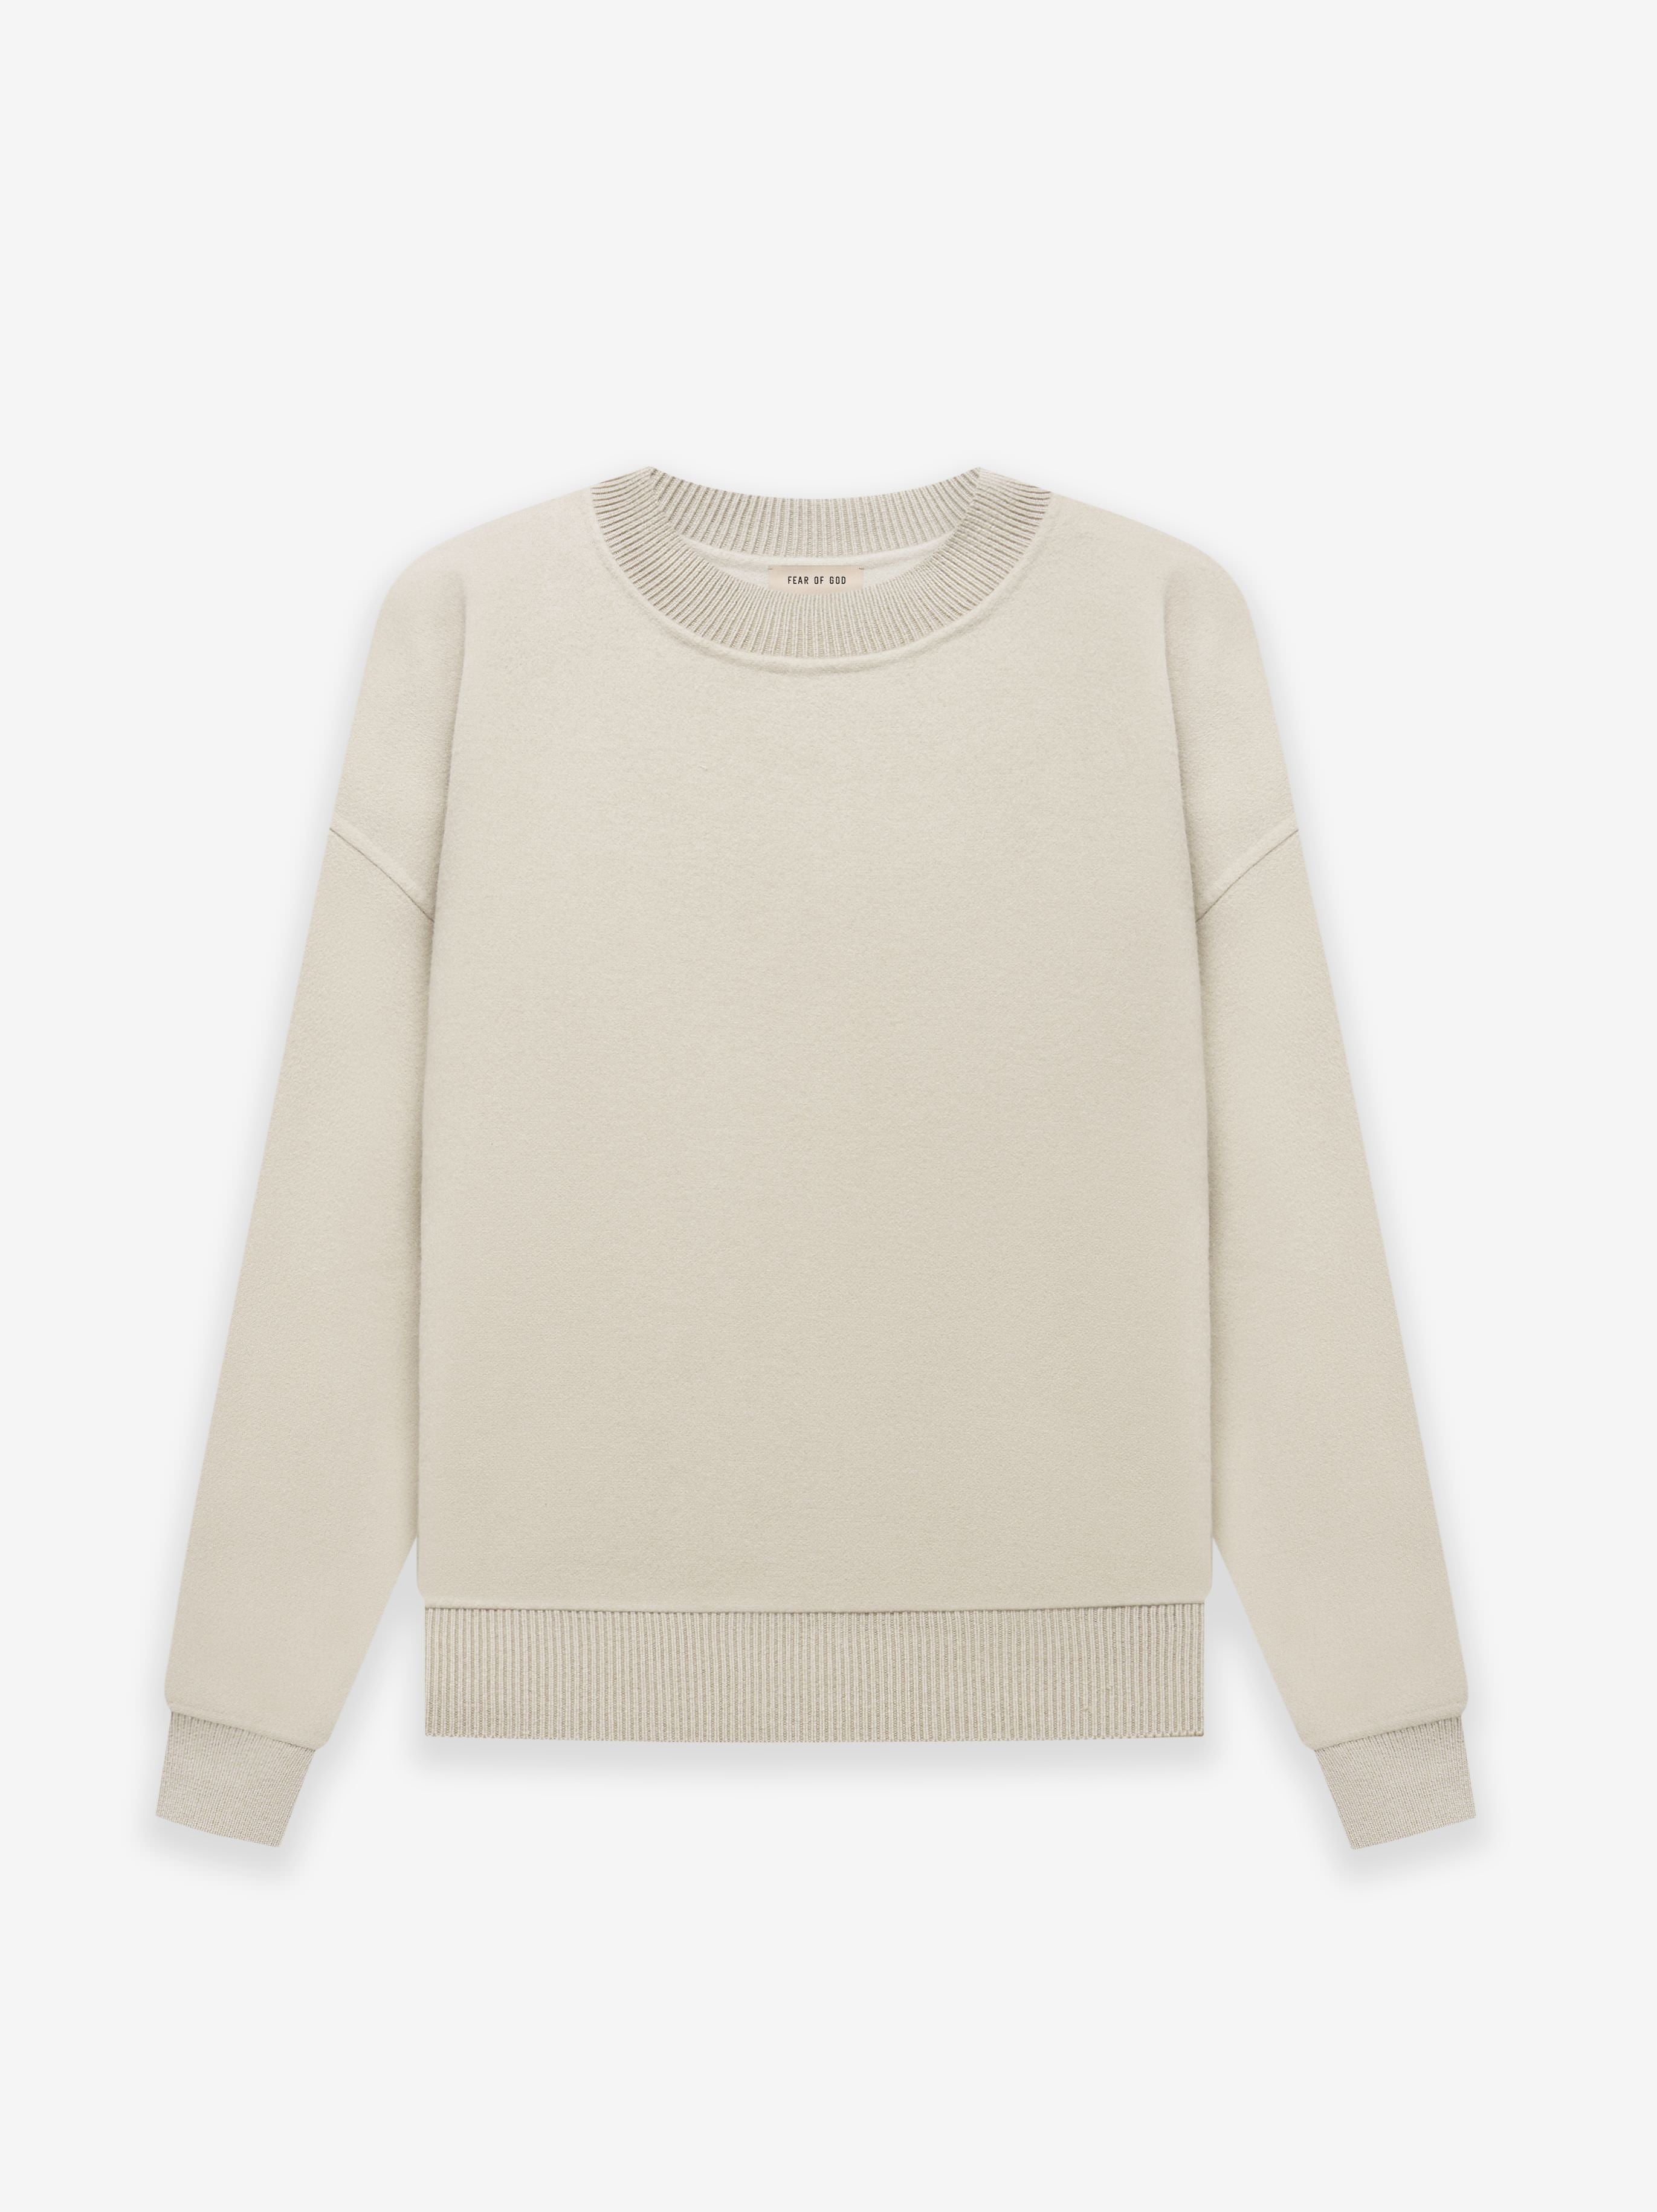 Fear of God Eternal Wool Cashmere Crewneck in Cement | Fear of God